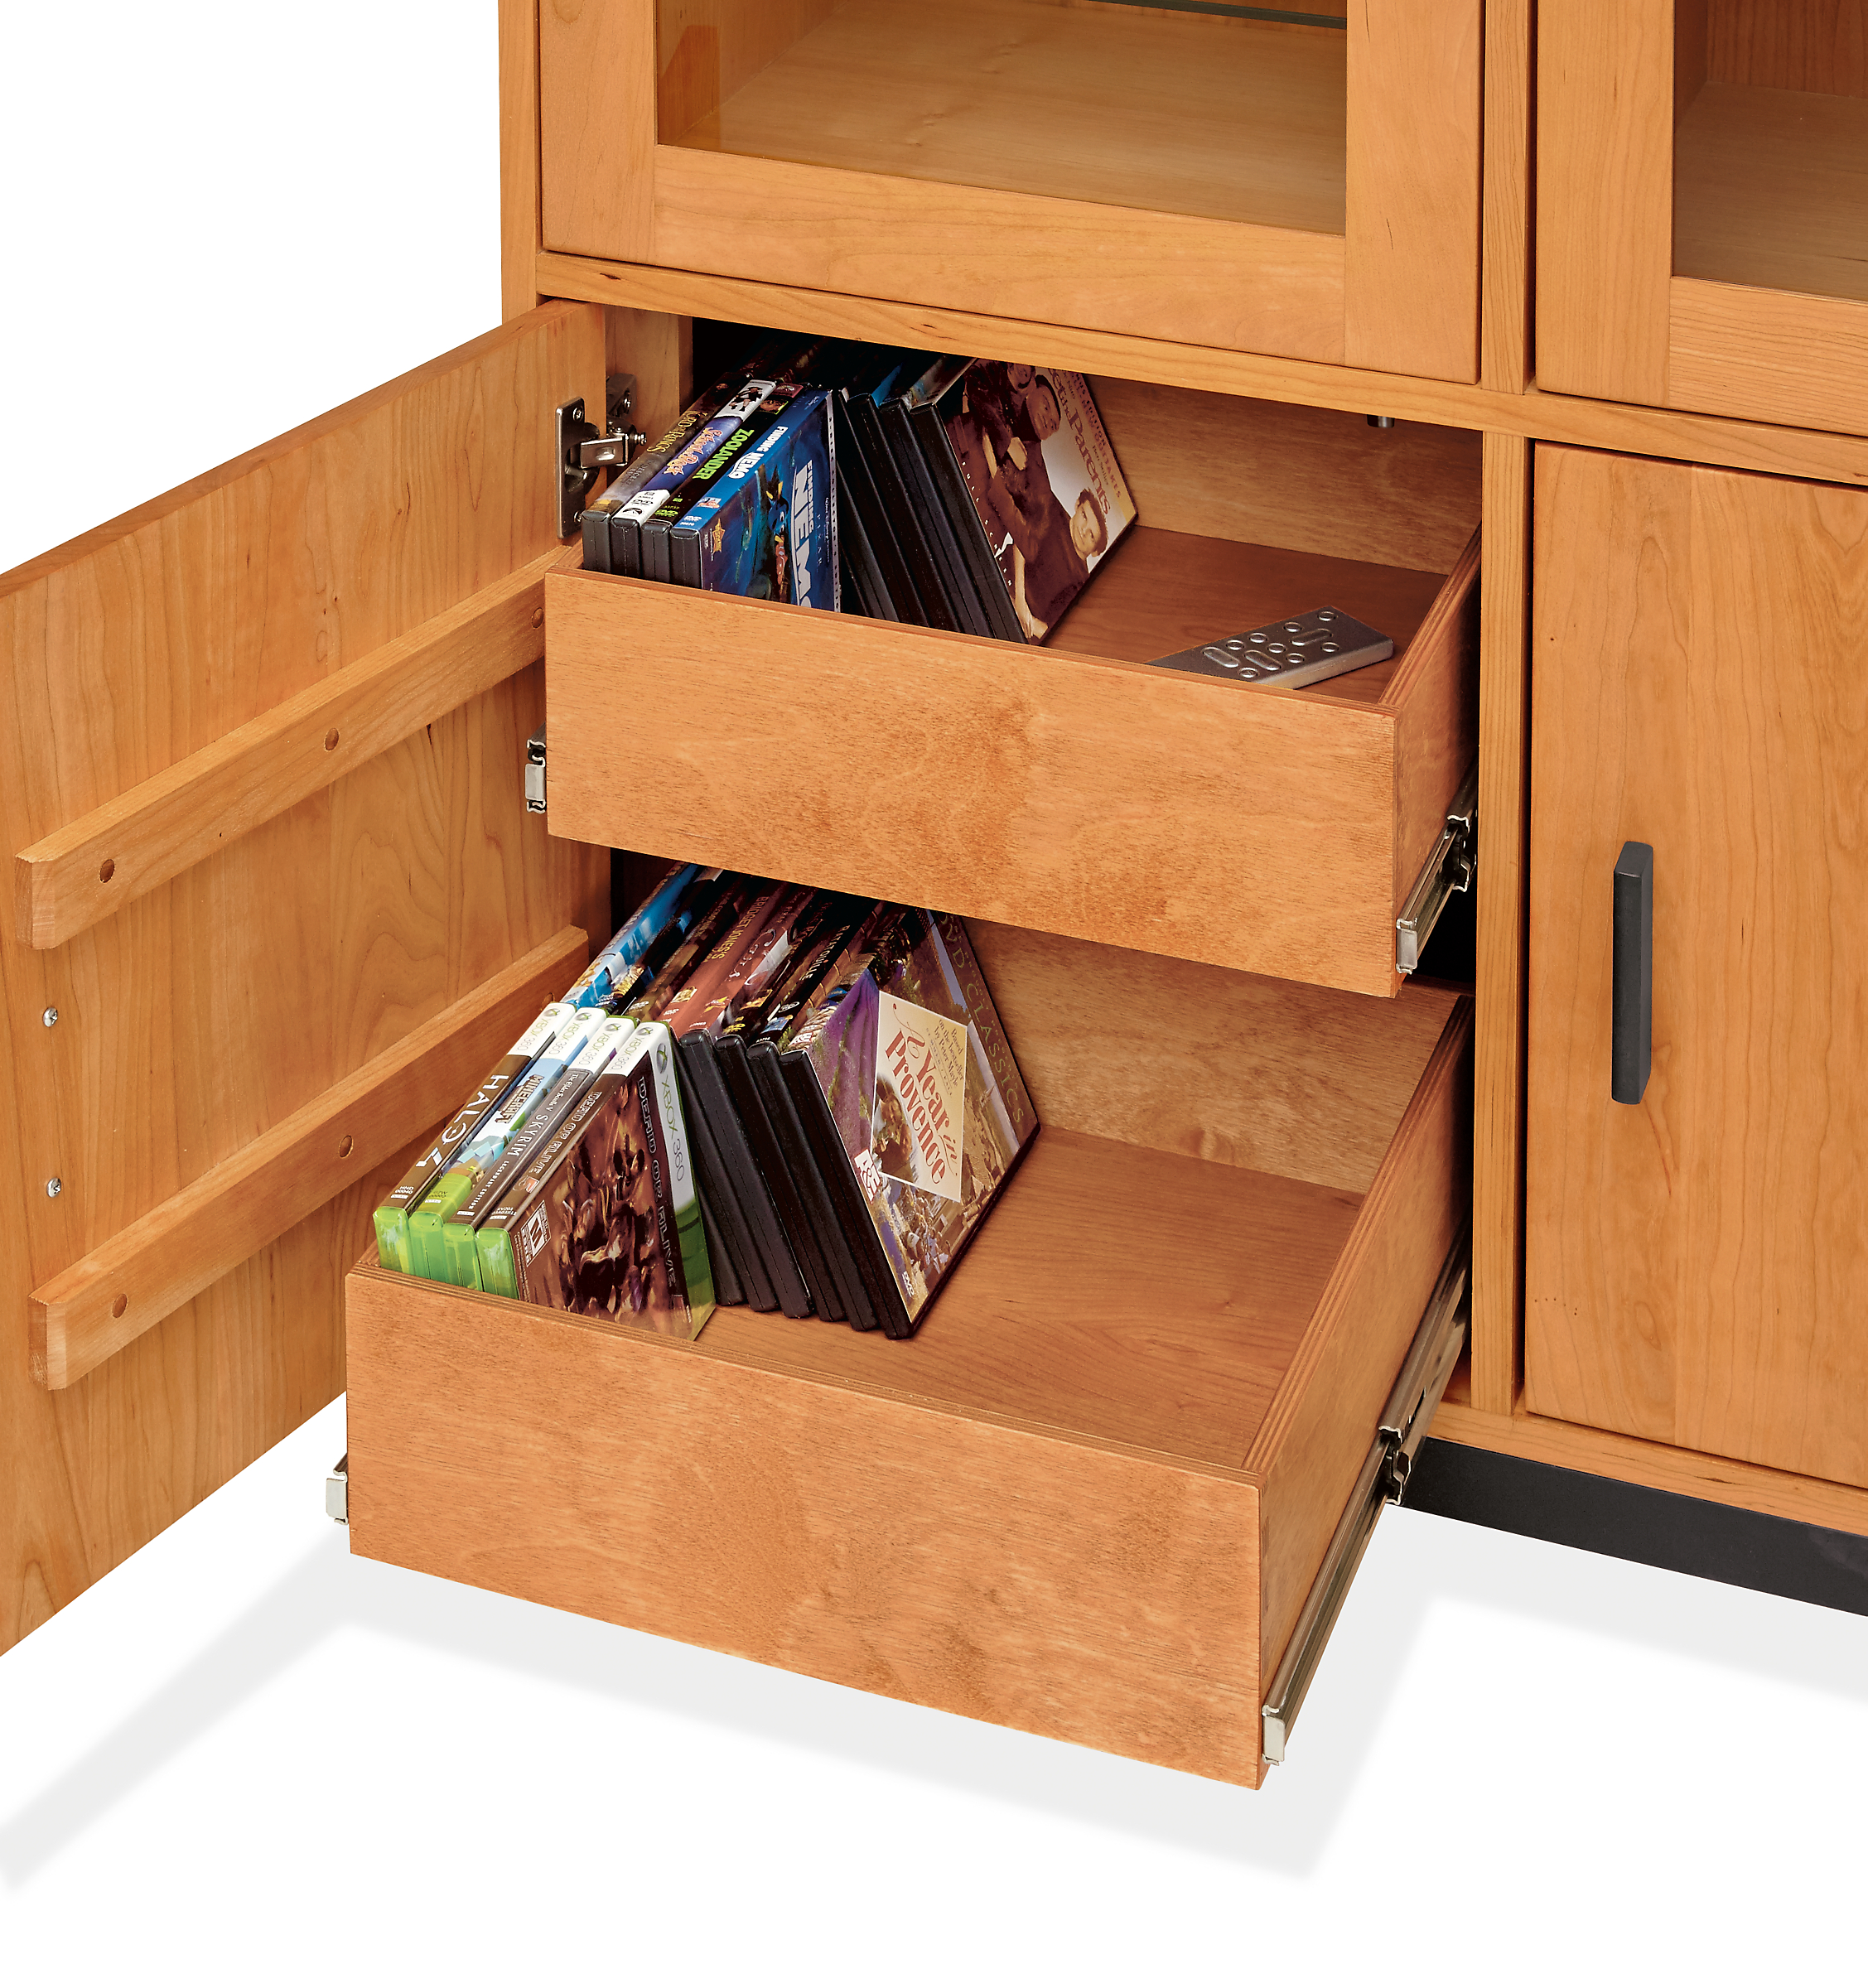 Detail of Linear custom doors with media drawers.